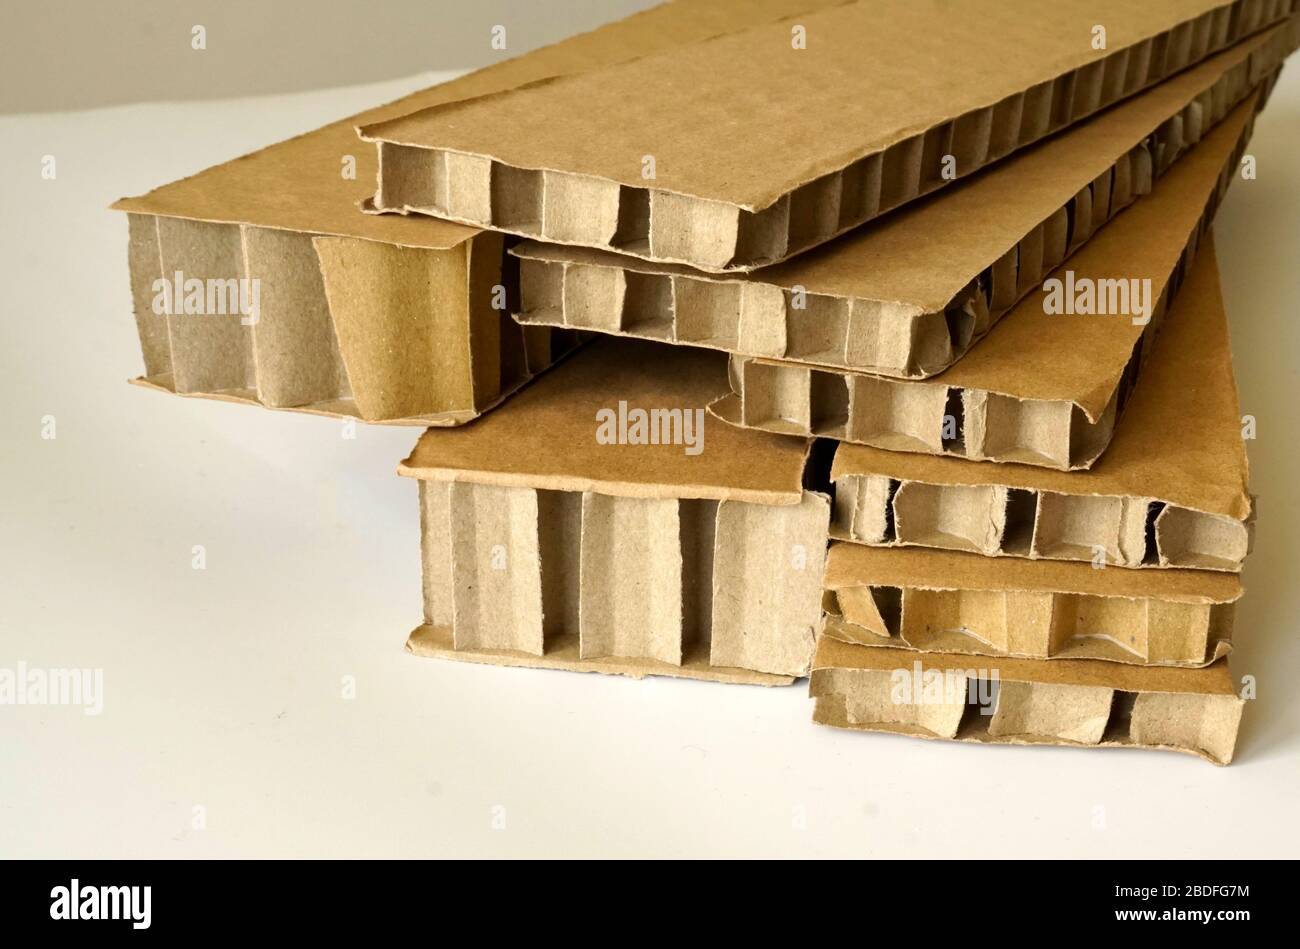 Corrugated cardboard Stock Photo by ©Olivier26 9147211